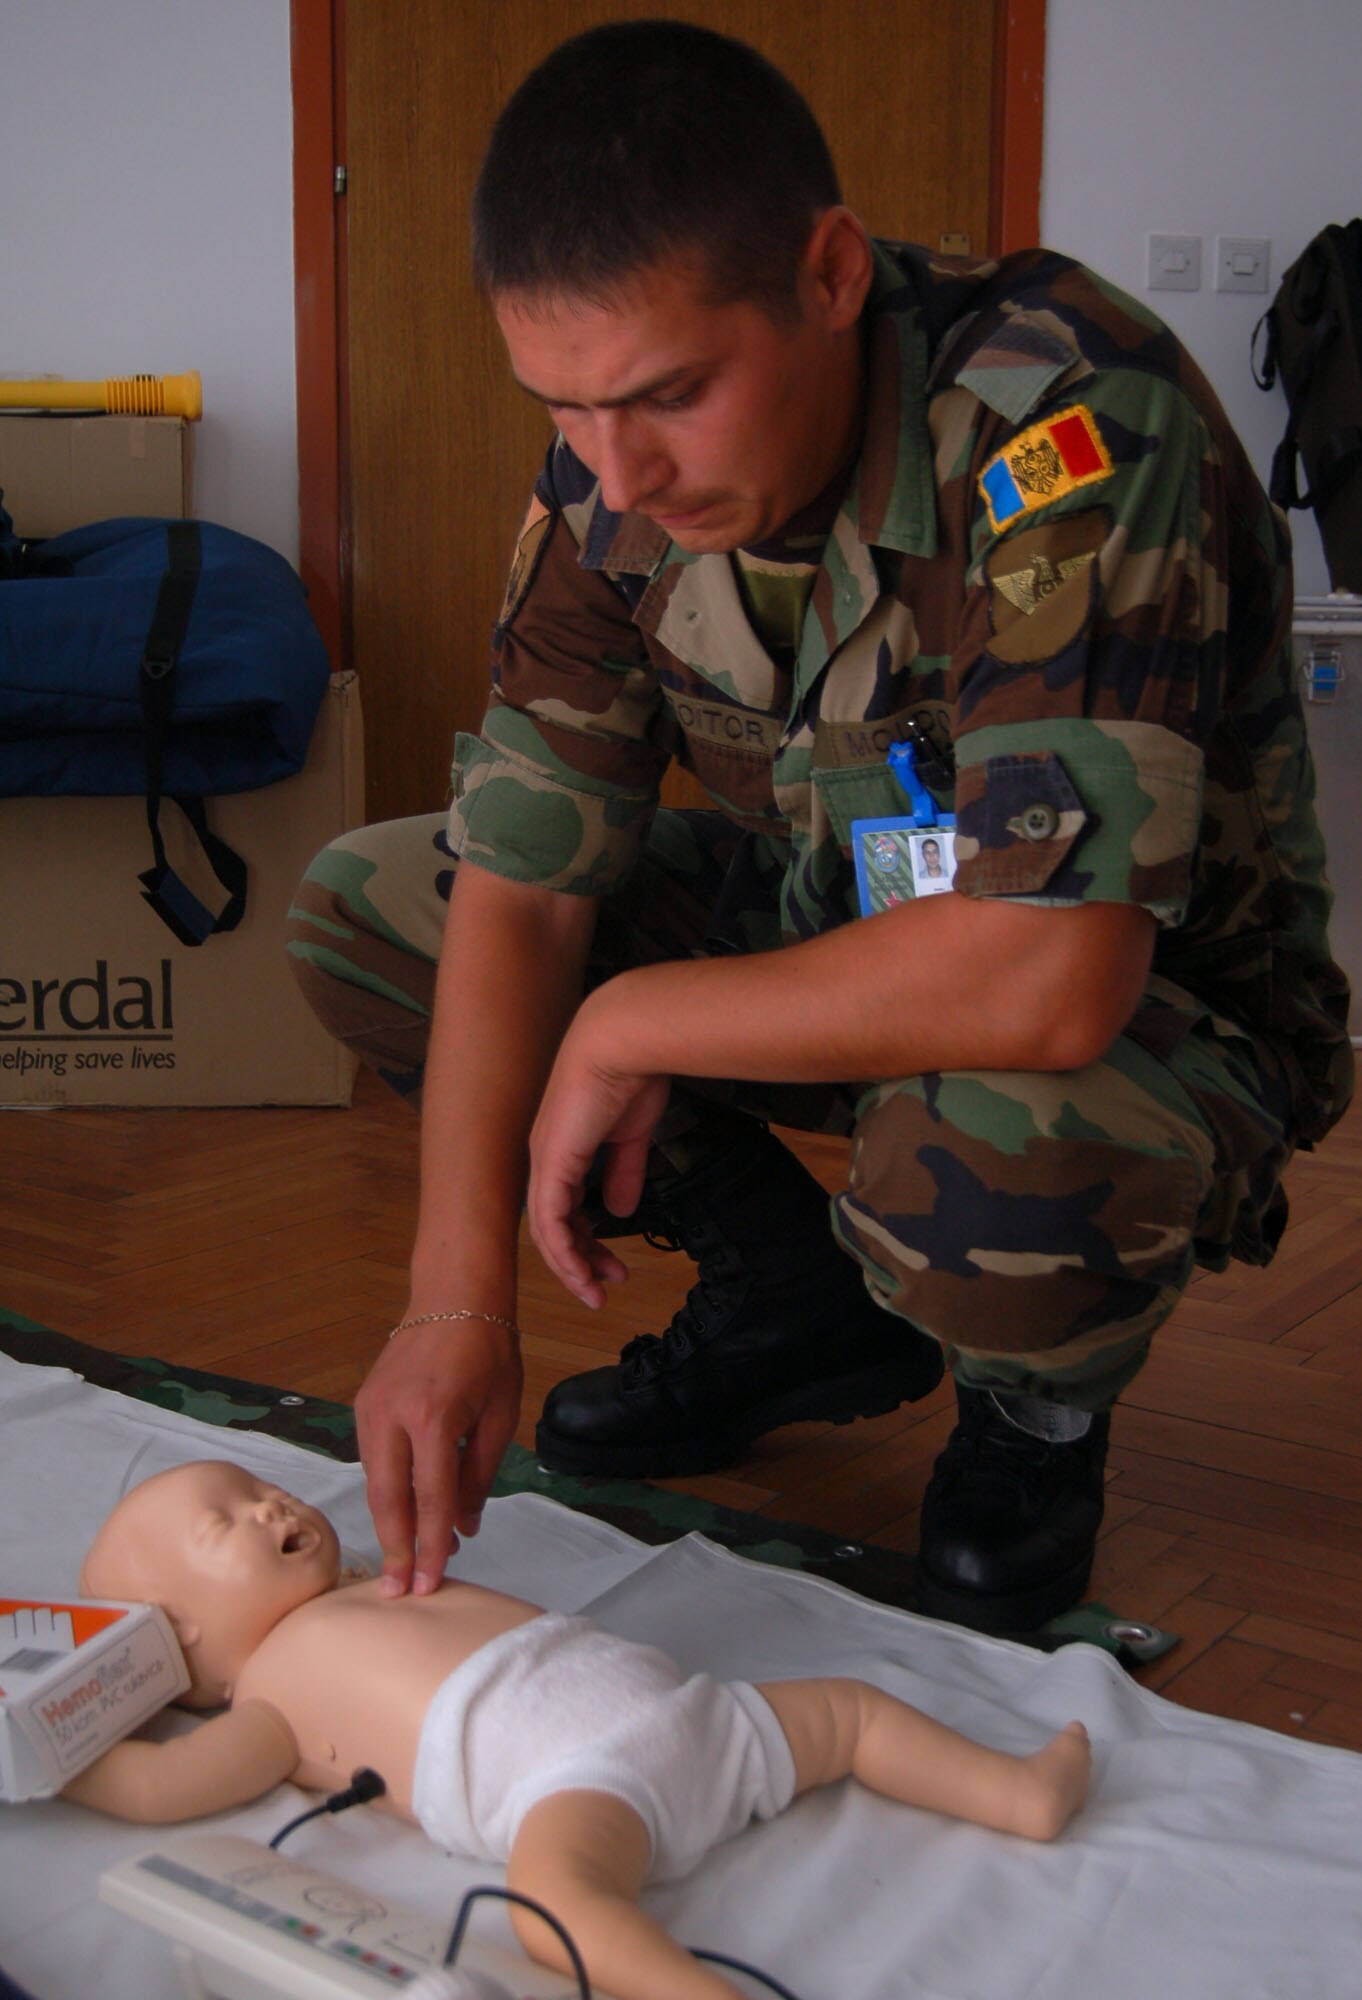 NIS, Serbia – Sergeant Alexandru Croitor, member of the Moldovan armed forces, practices providing cardiopulmonary resuscitation to an infant in a trauma nursing course Sept. 4 during the military medical training exercise in Central and Eastern Europe, or MEDCEUR 2009, in-class training portion. Members of 15 nations participated in the in-class, or didactics, segment of MEDCEUR 2009 prior to a live exercise scheduled for Sept. 9-11. (U.S. Air Force photo/Senior Airman Kali L. Gradishar)